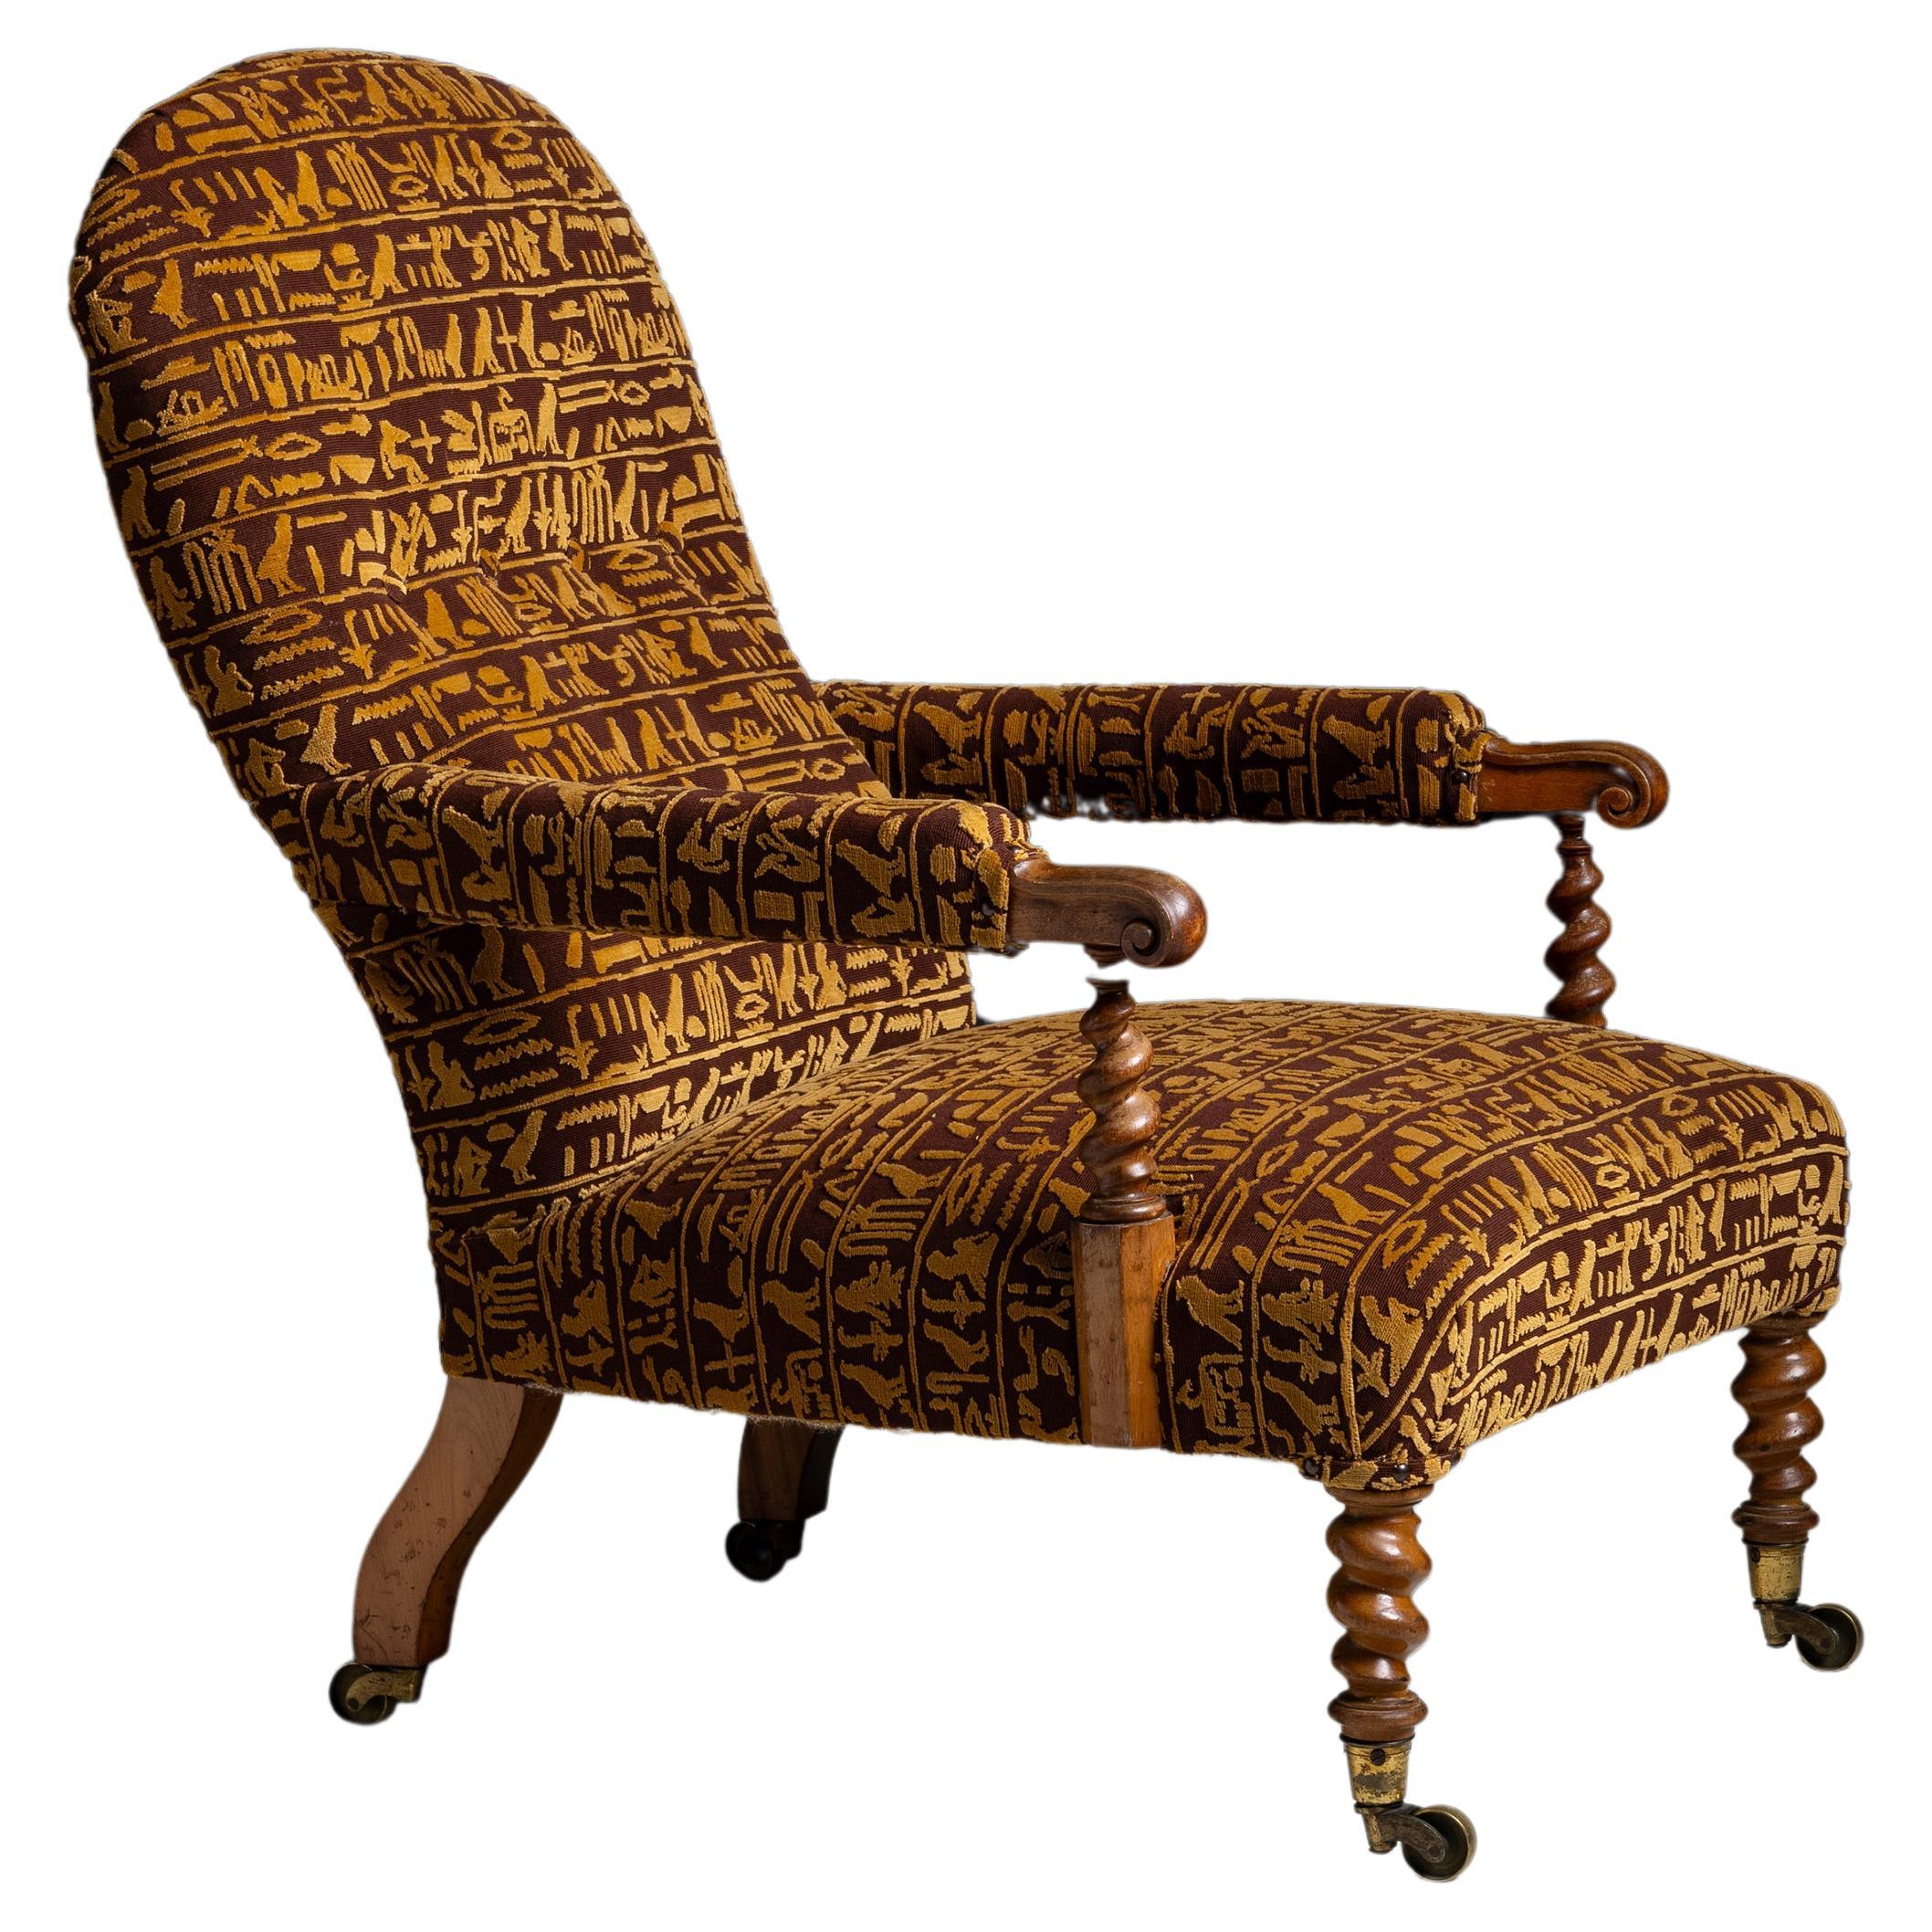 Library Chair in Velvet Fabric by Pierre Frey, England circa 1890